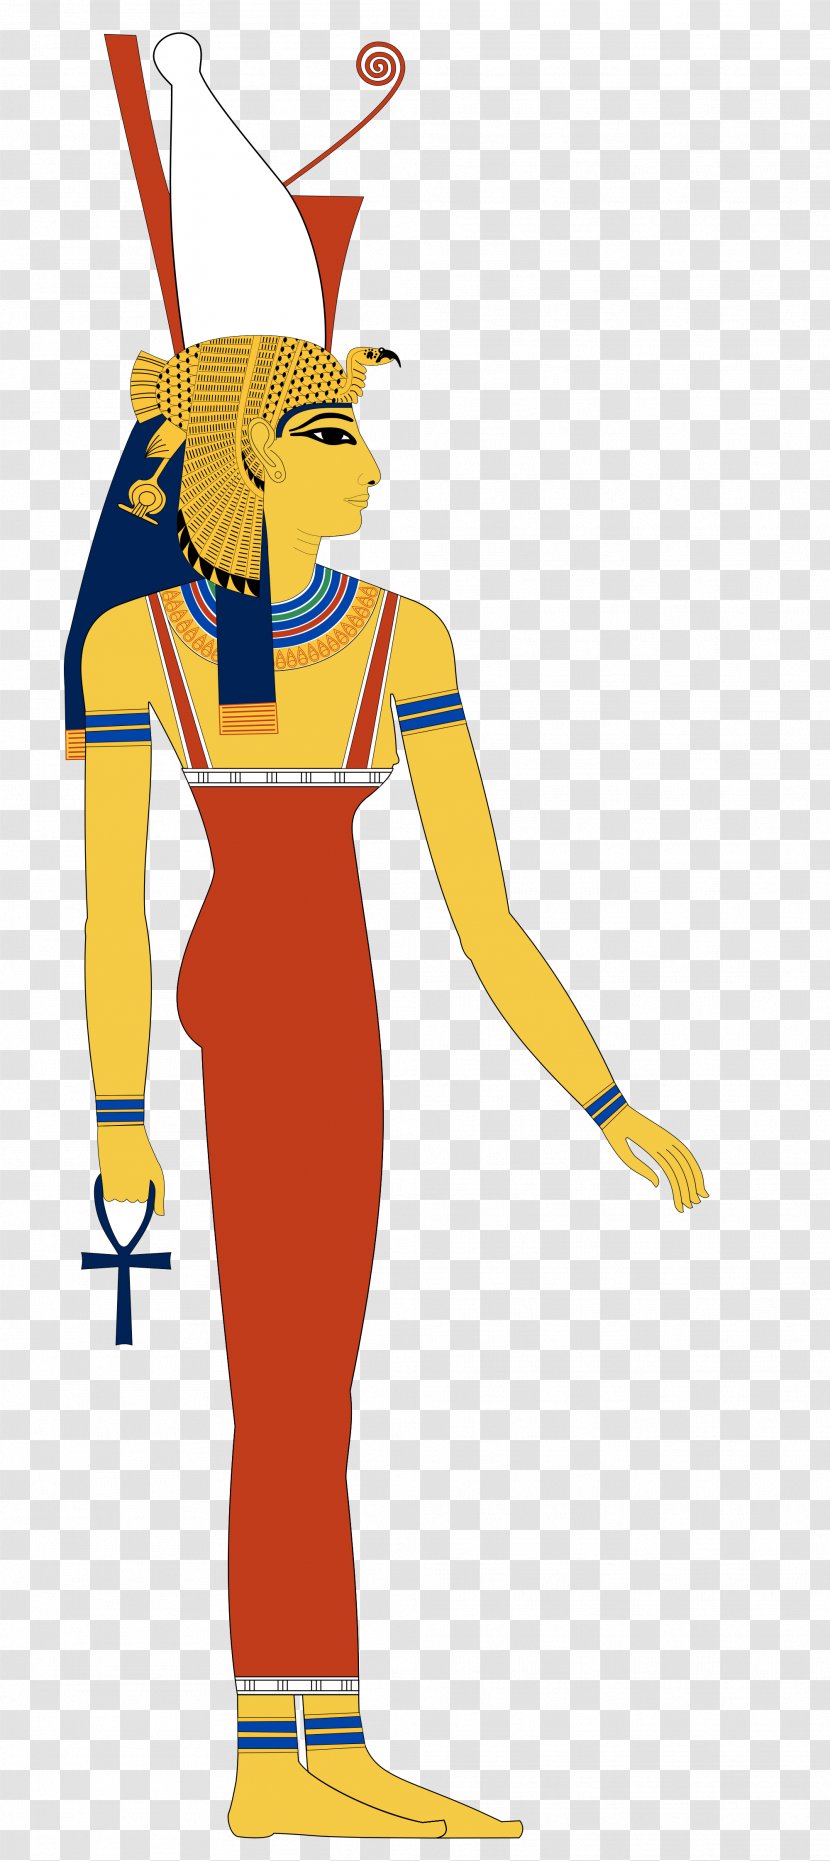 Ancient Egyptian Deities Isis Religion Art Of Egypt - Goddess Transparent PNG